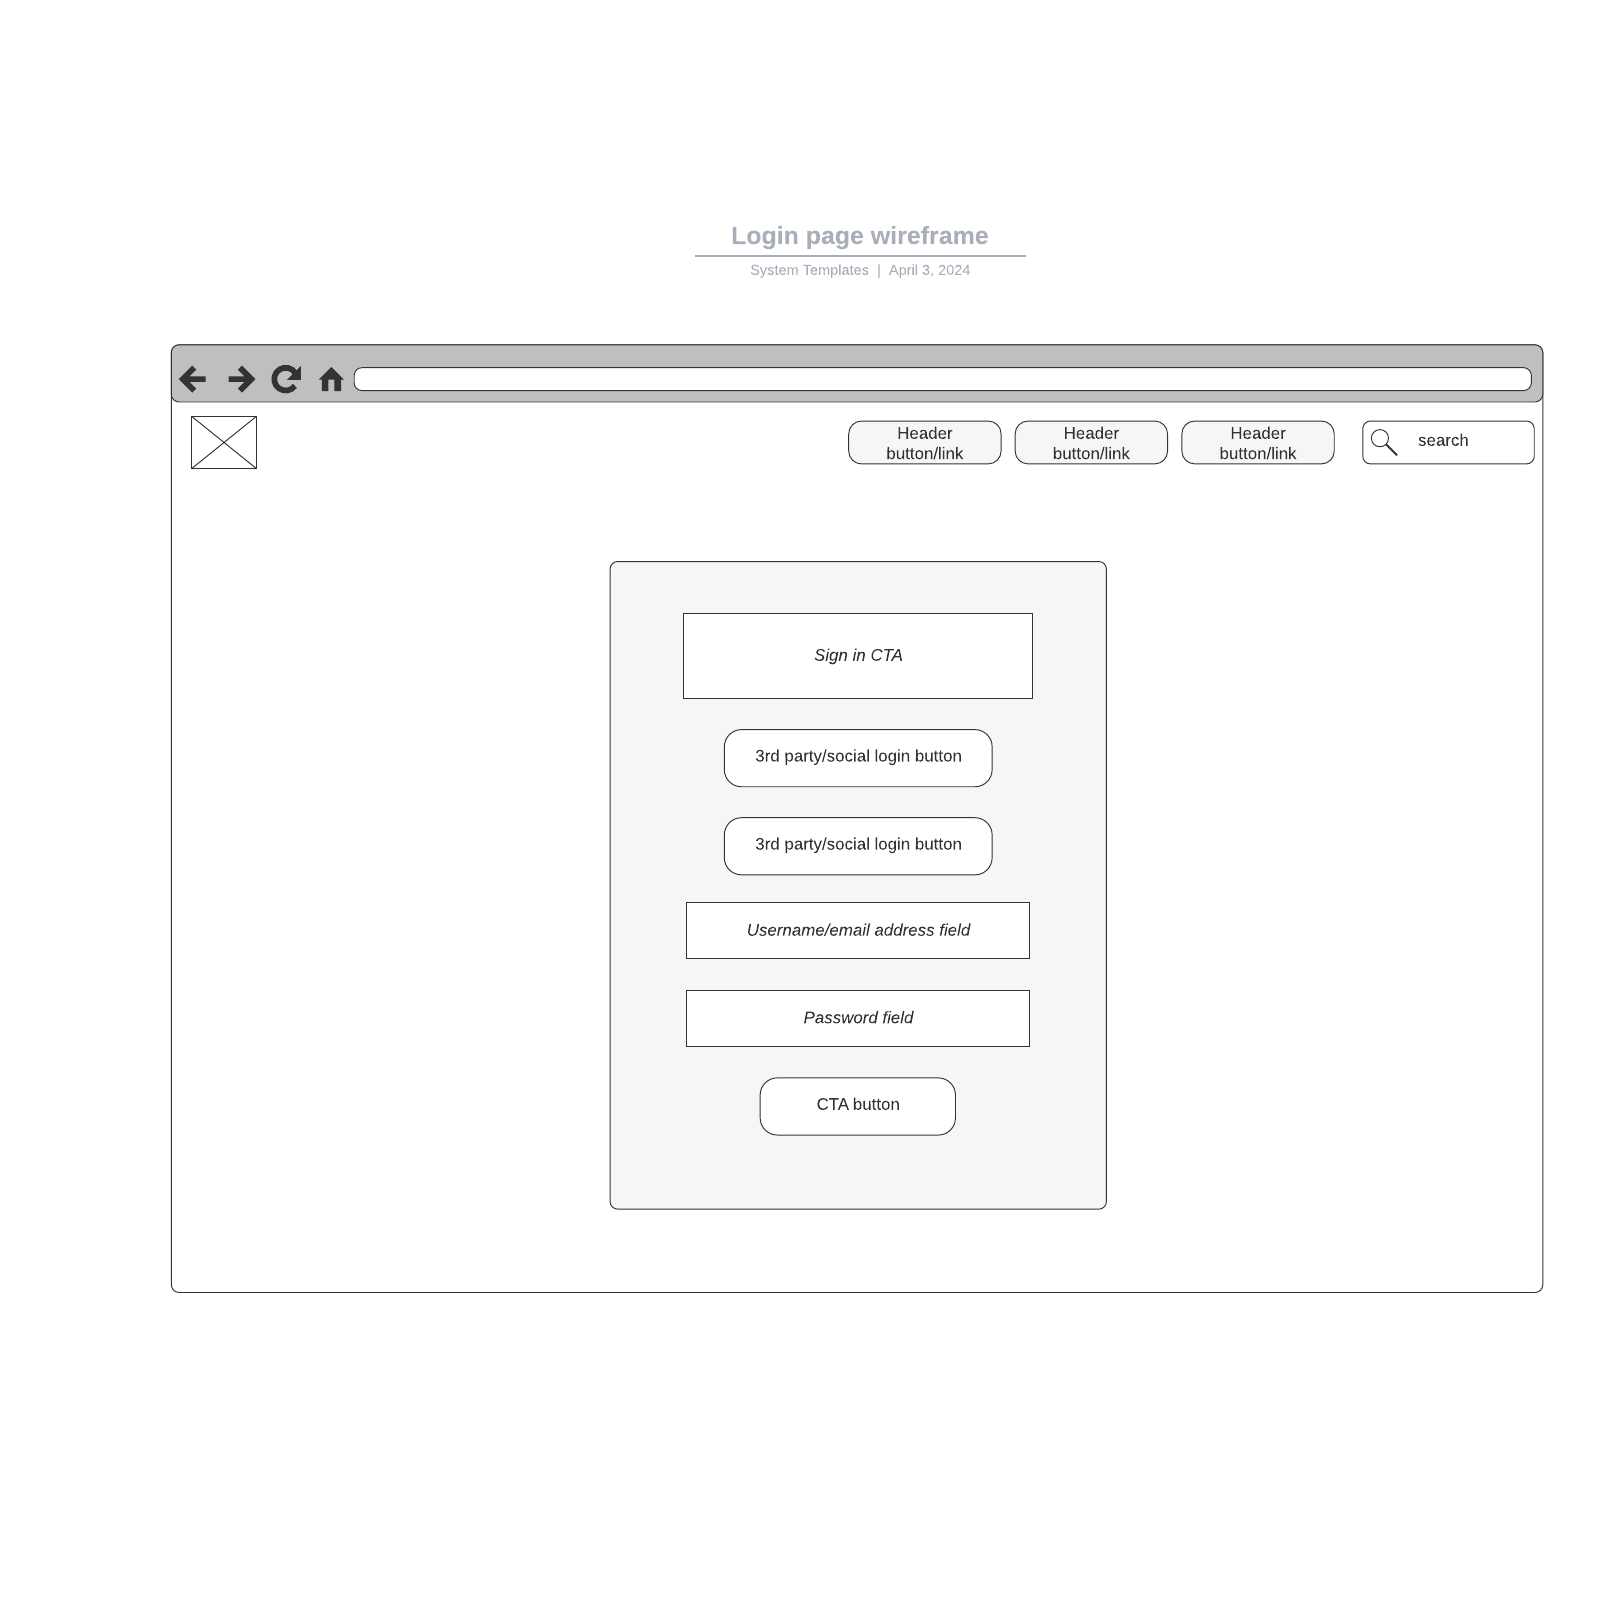 Login page wireframe example